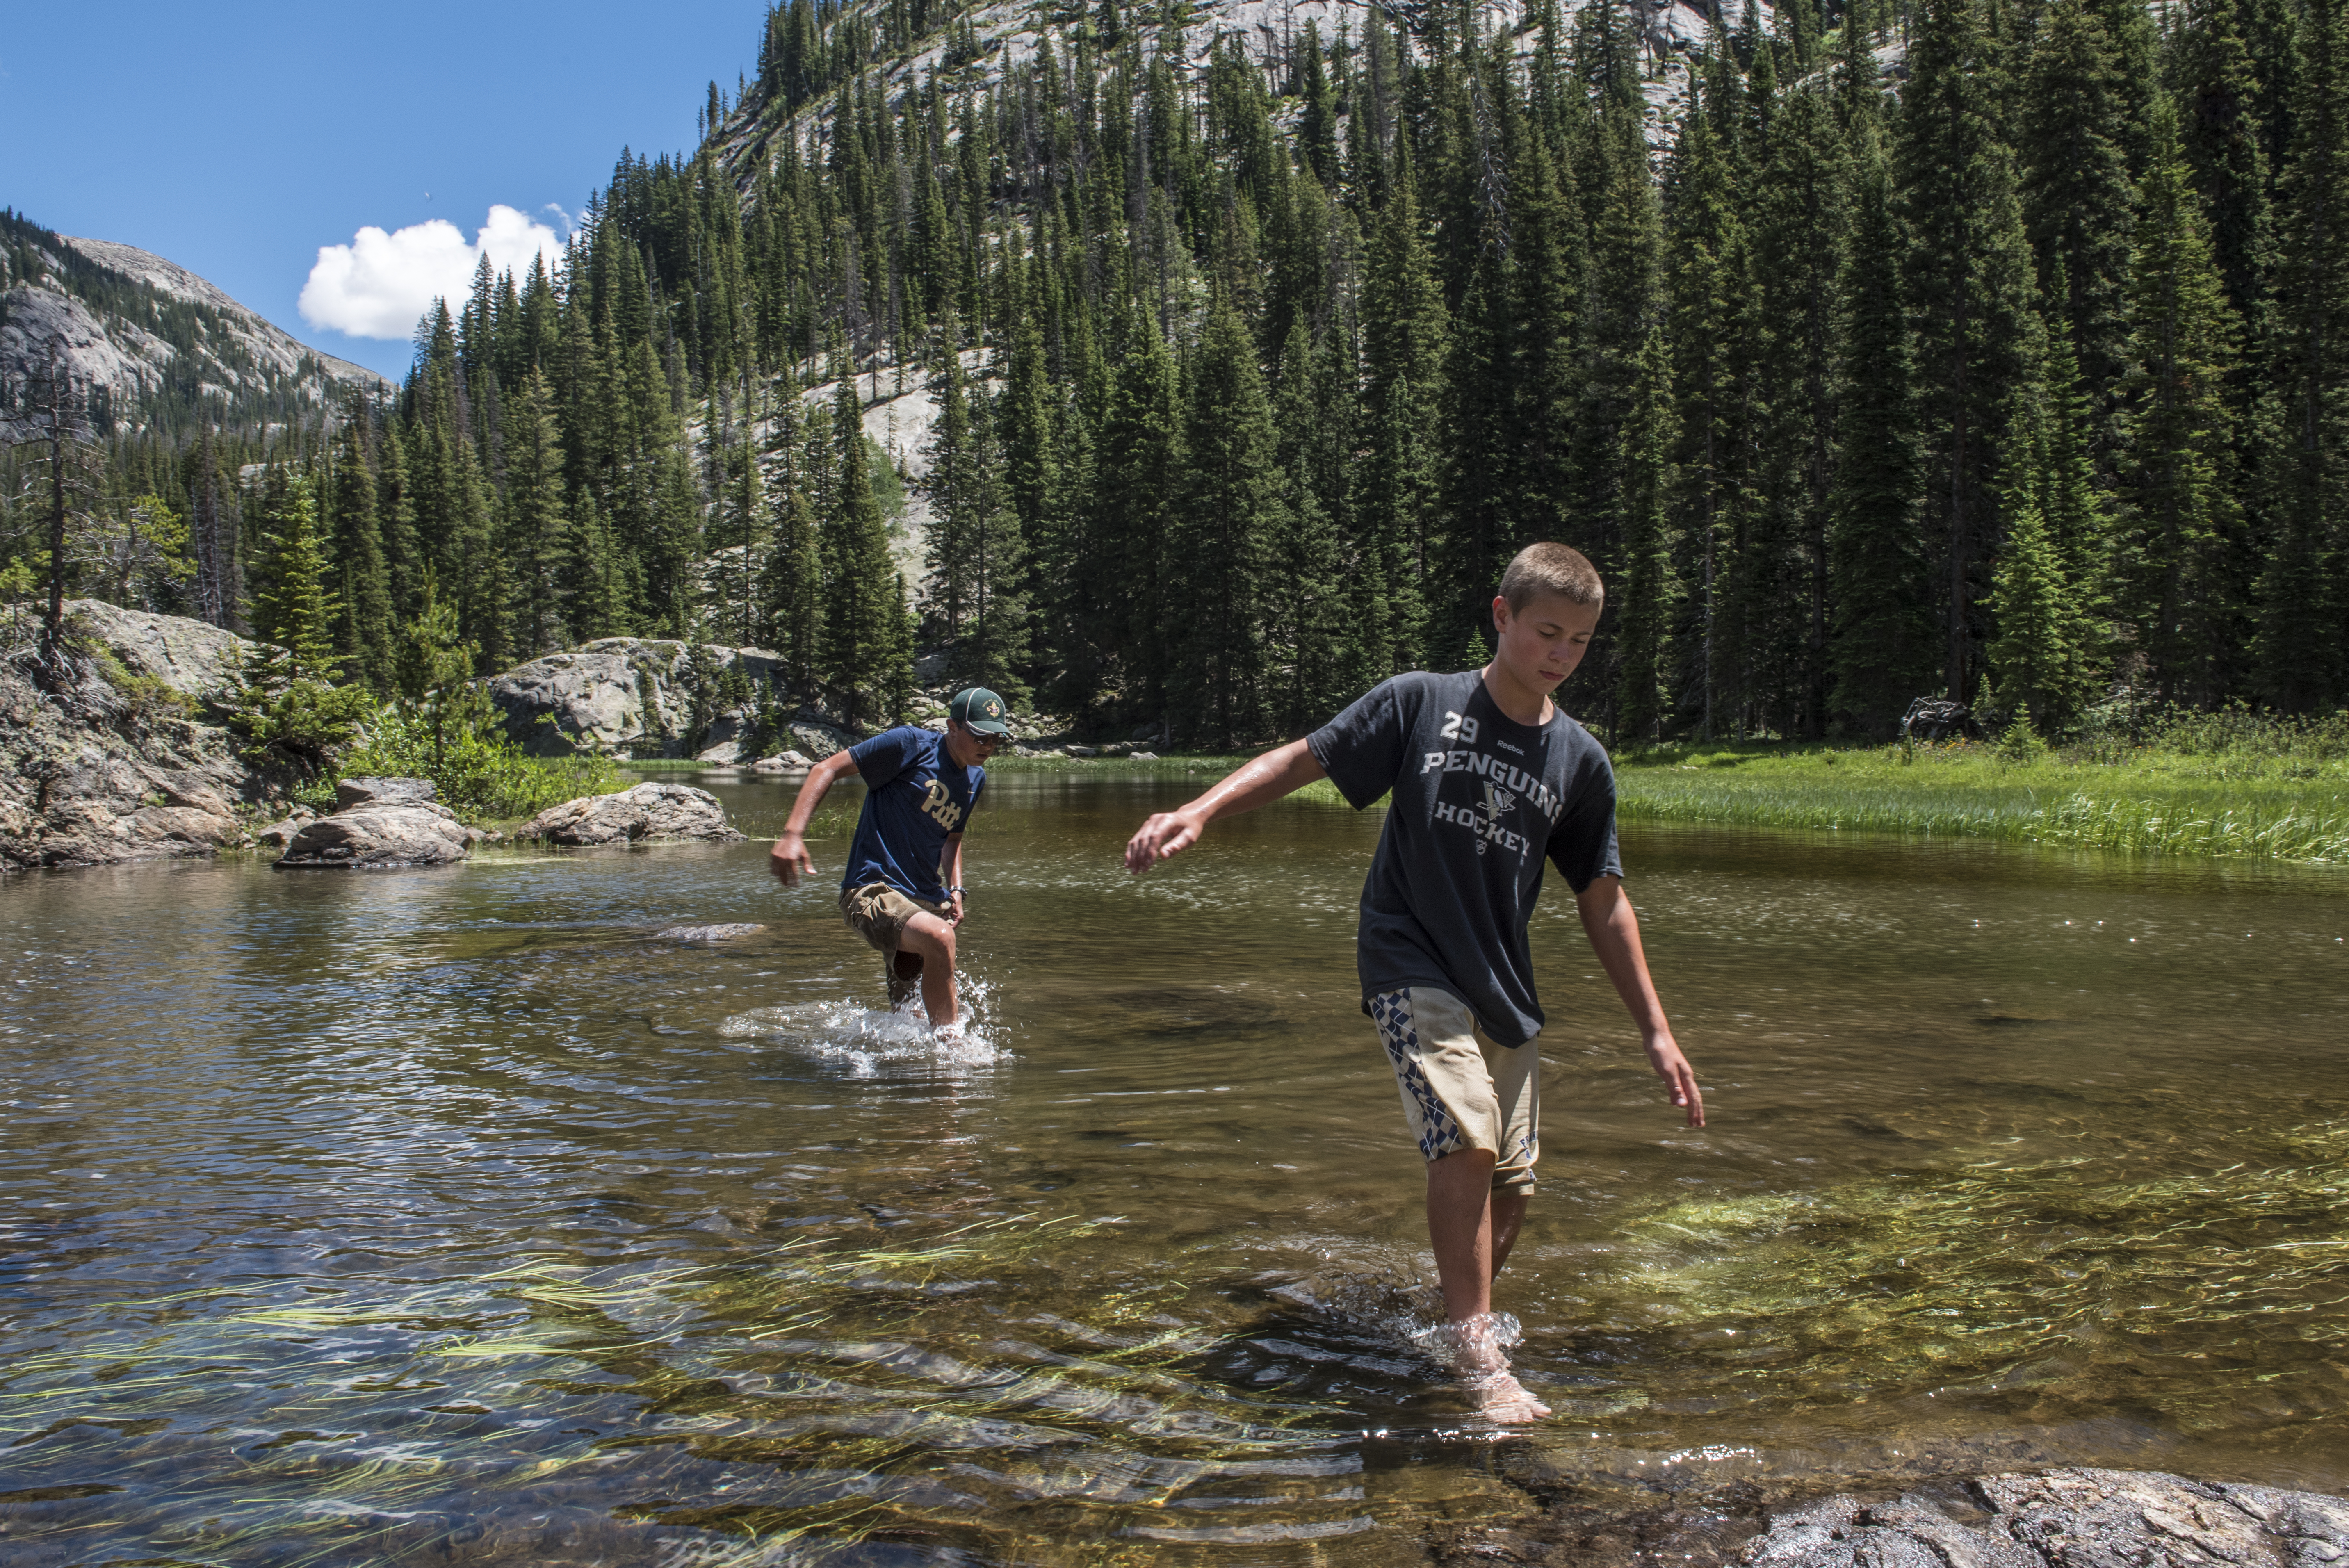 Scouts from PA explore Lone Pine Lake in Rocky Mountain National Park, during a two week adventure trip to Colorado